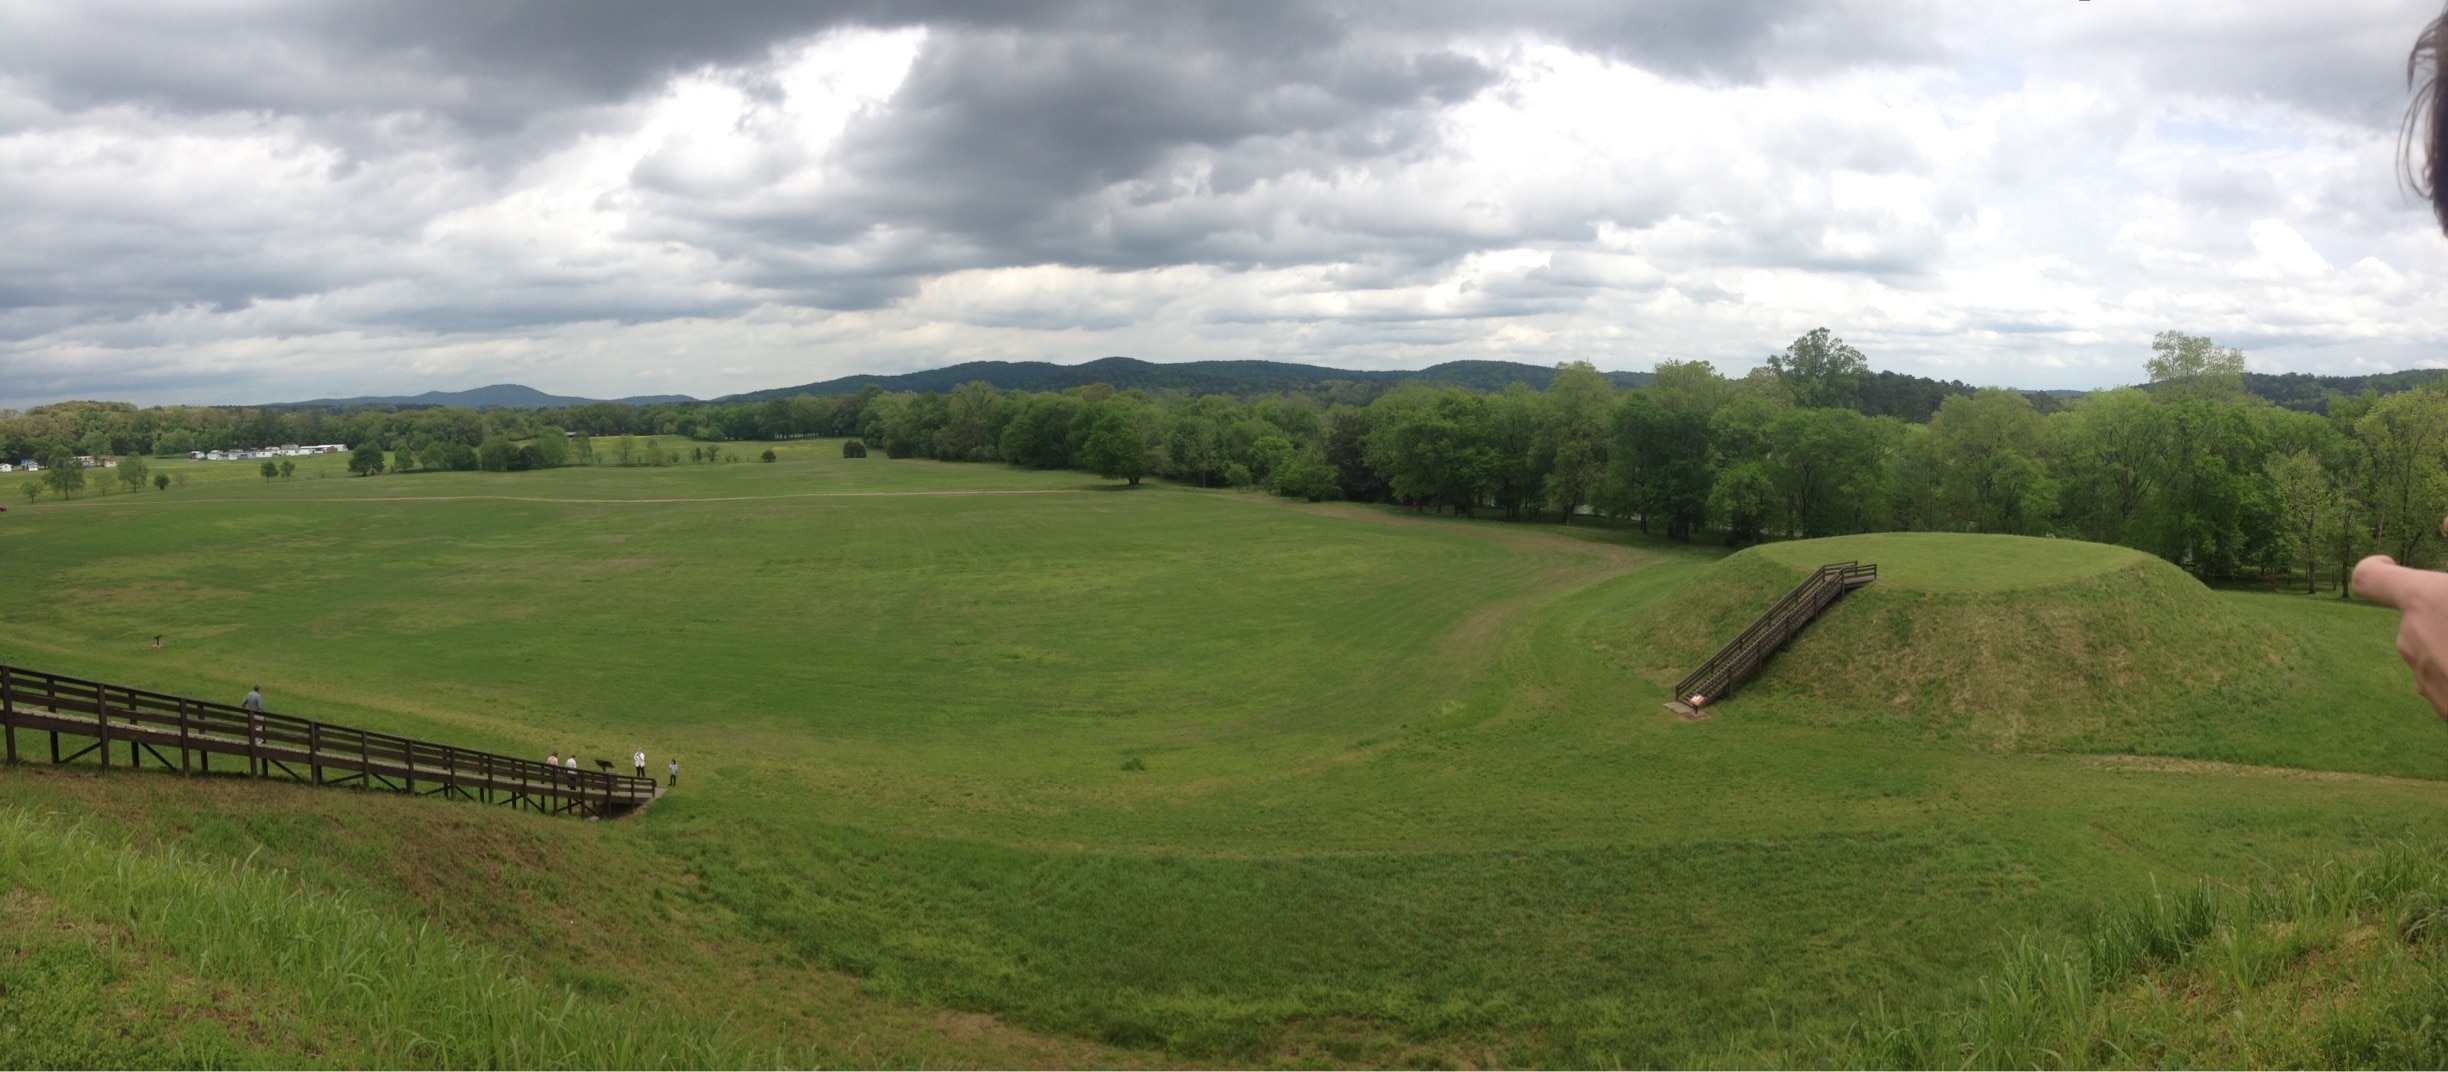 Panoramic view from the top of the tallest mound at Etowah Historic Mound Site.